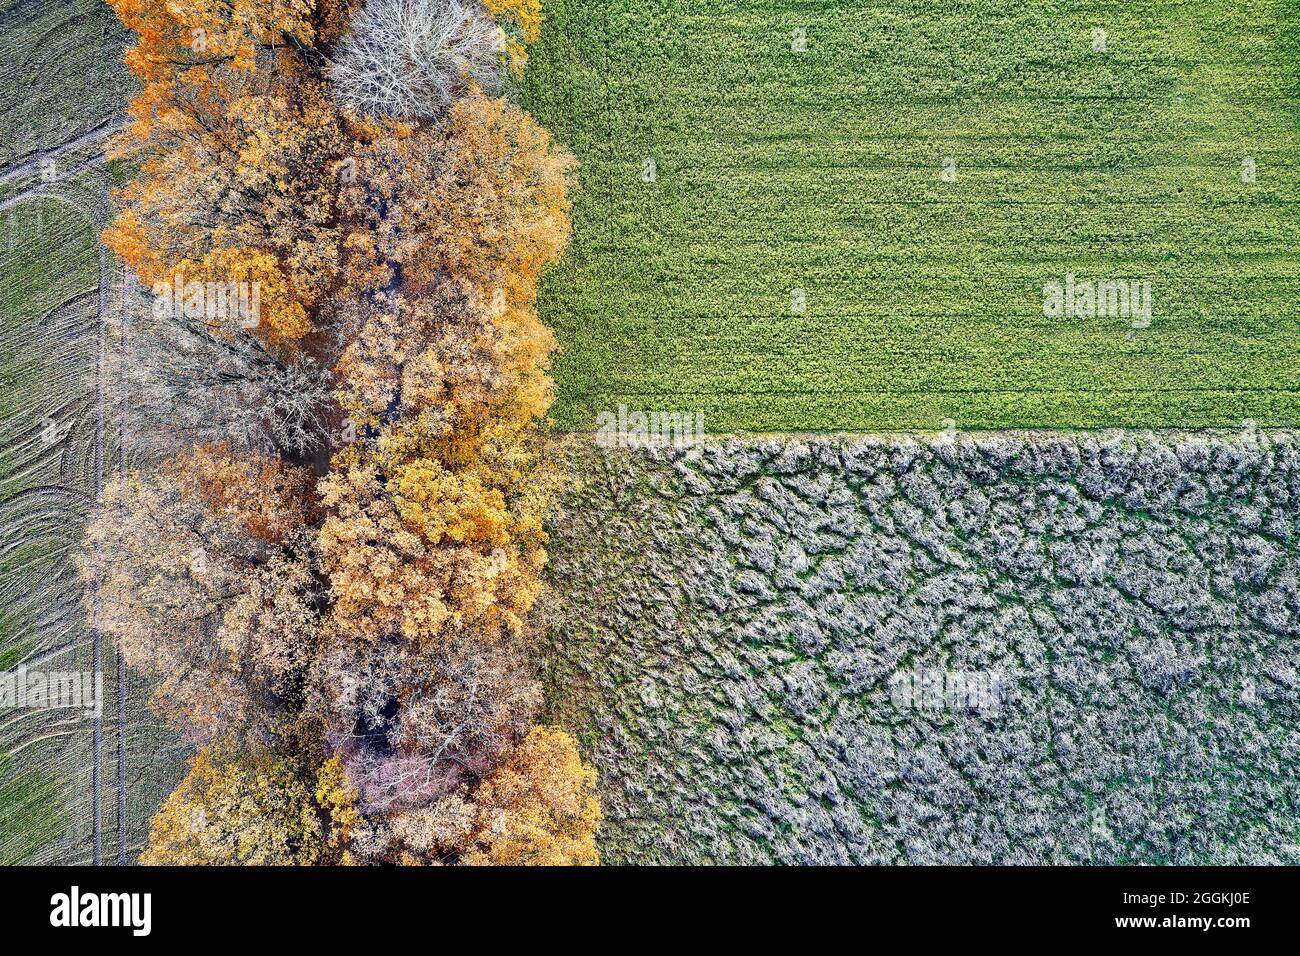 Ecology, land use, natural areas in autumn, close to nature, aerial view, geometric shapes and structures Stock Photo